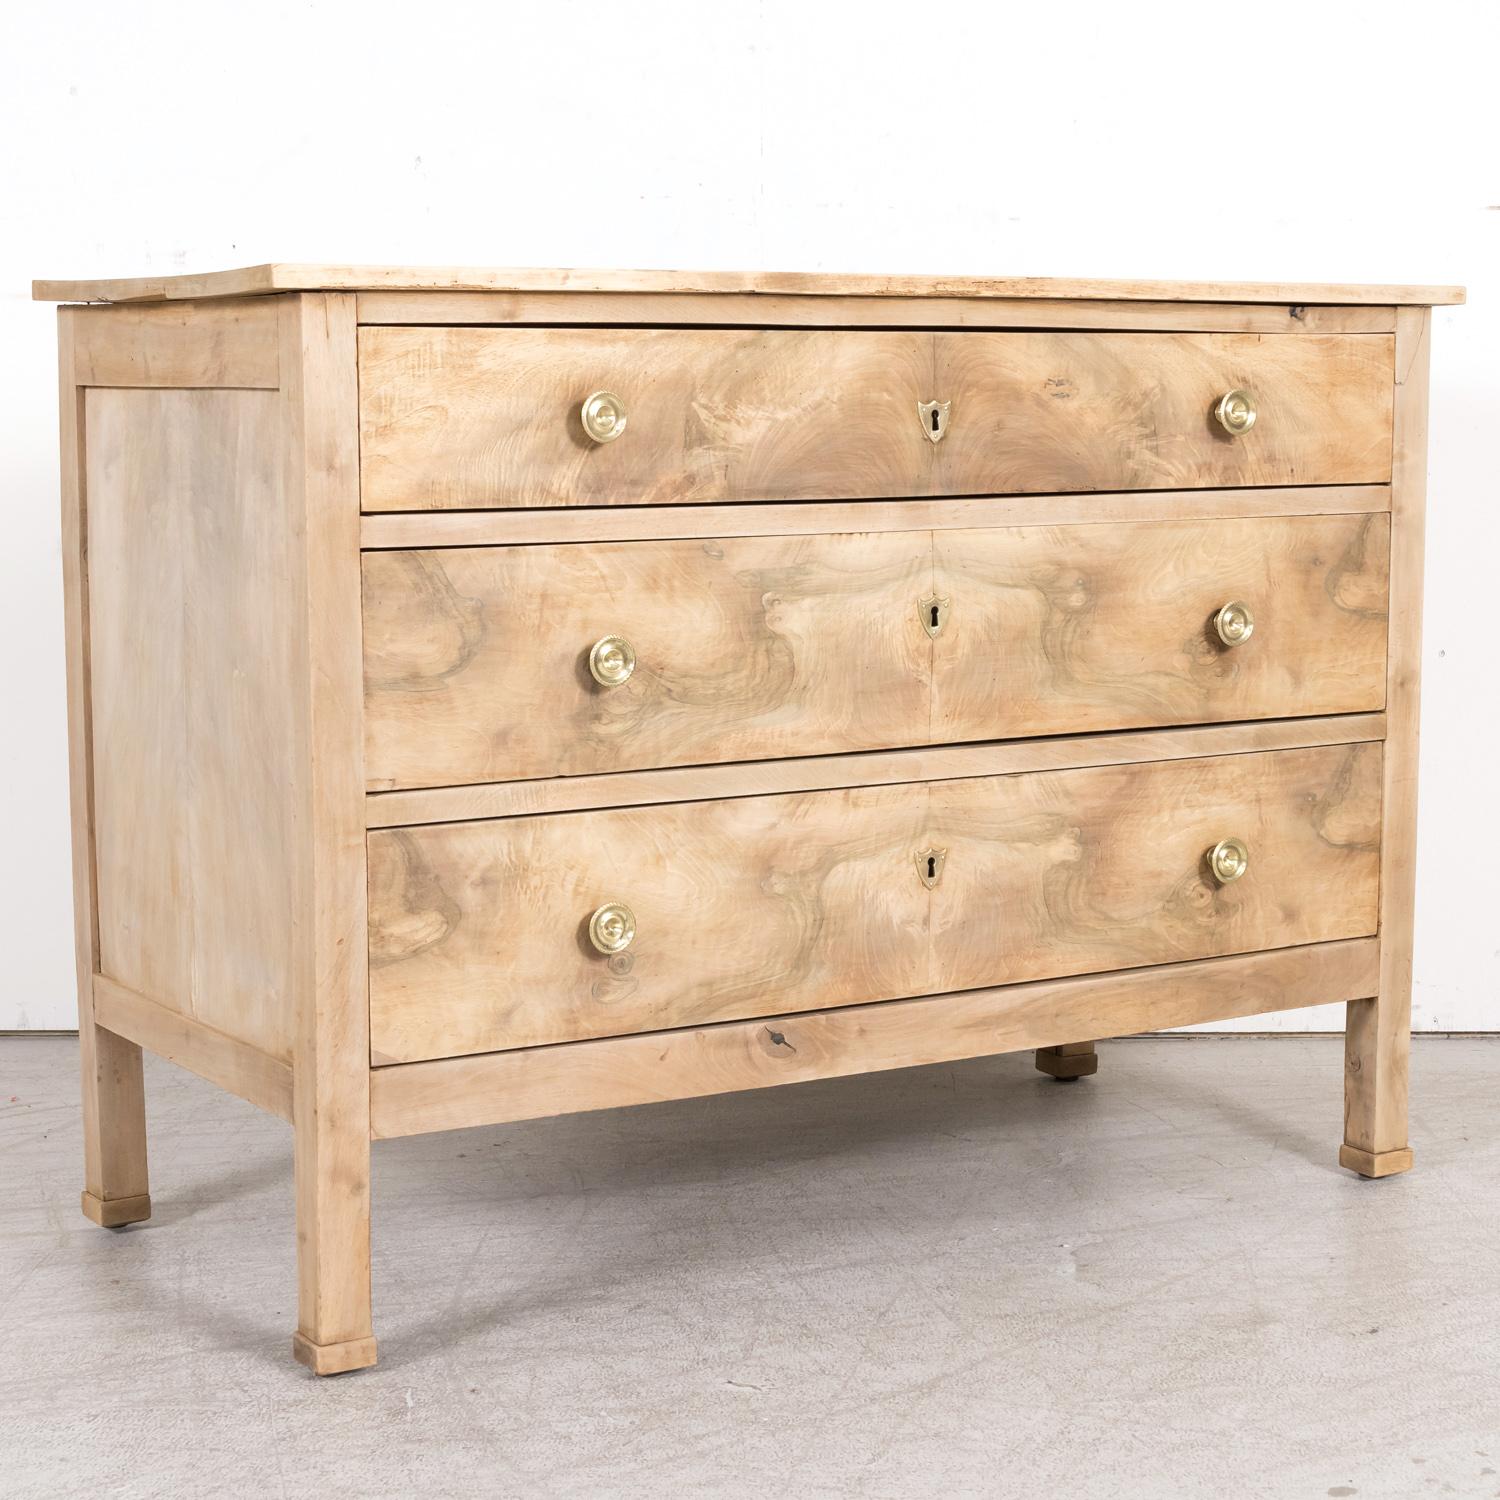 A striking mid-18th century French Louis XVI period commode handcrafted of walnut by talented artisans in Lyon, circa 1760s. Having a bookmatched burled walnut front, this handsome Lyonnaise chest of drawers has a bleached or washed finish and